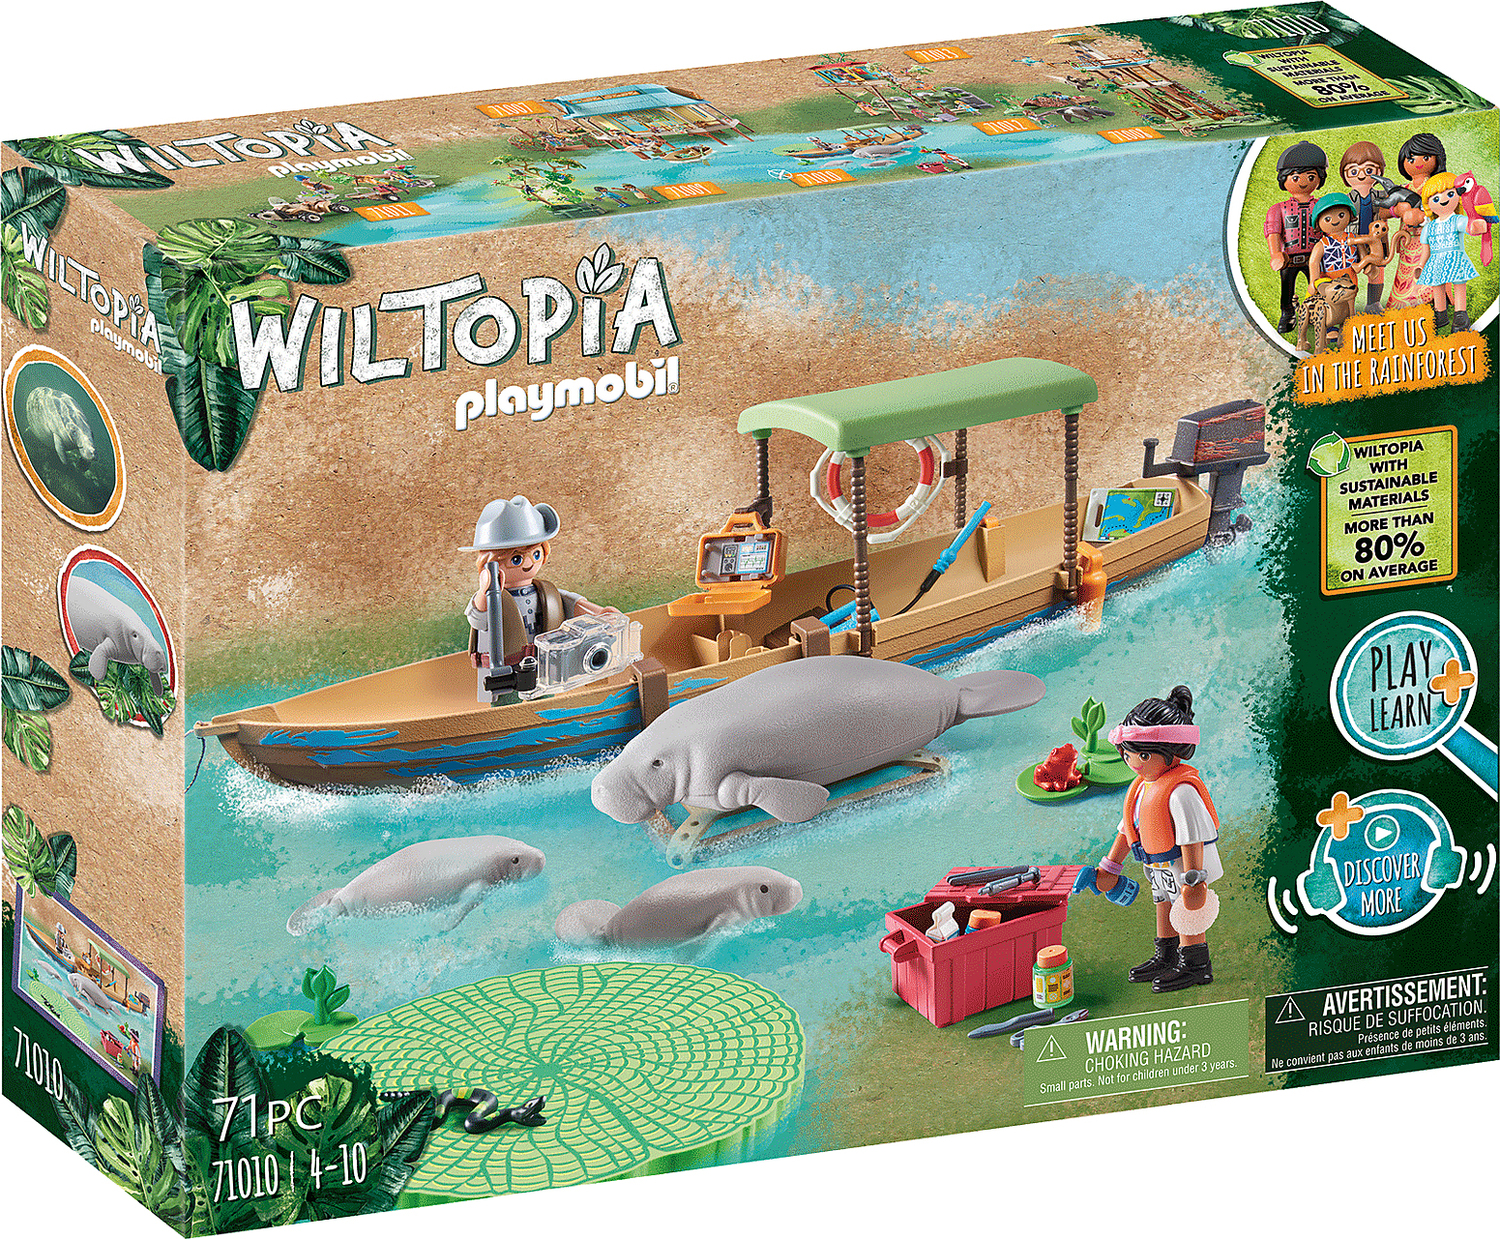 Playmobil Wiltopia - Boat Trip to the Manatees - Imagination Toys